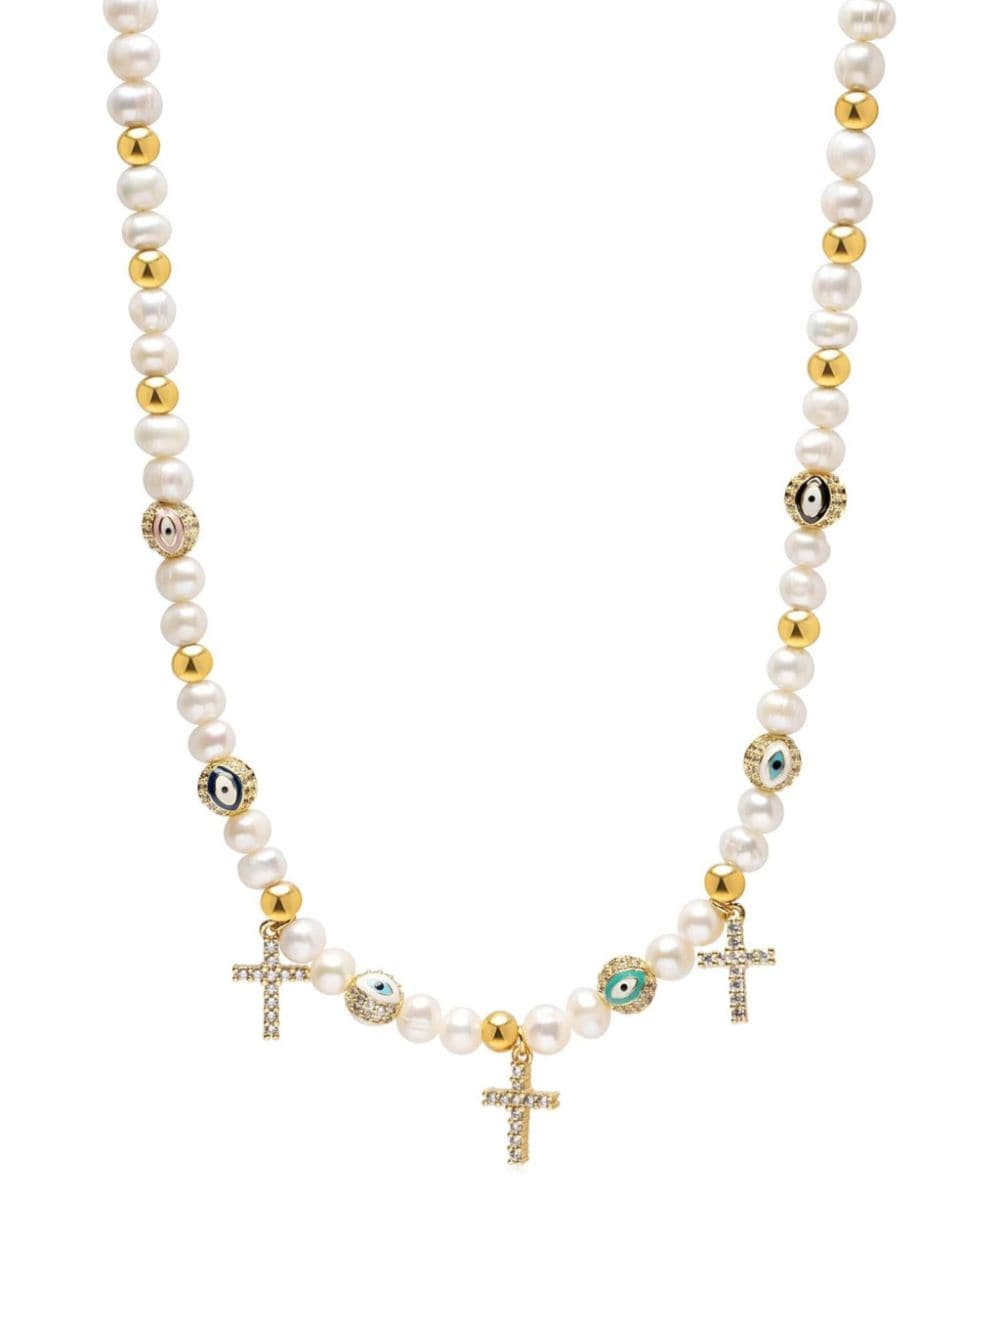 Evil Eye and cross beaded necklace